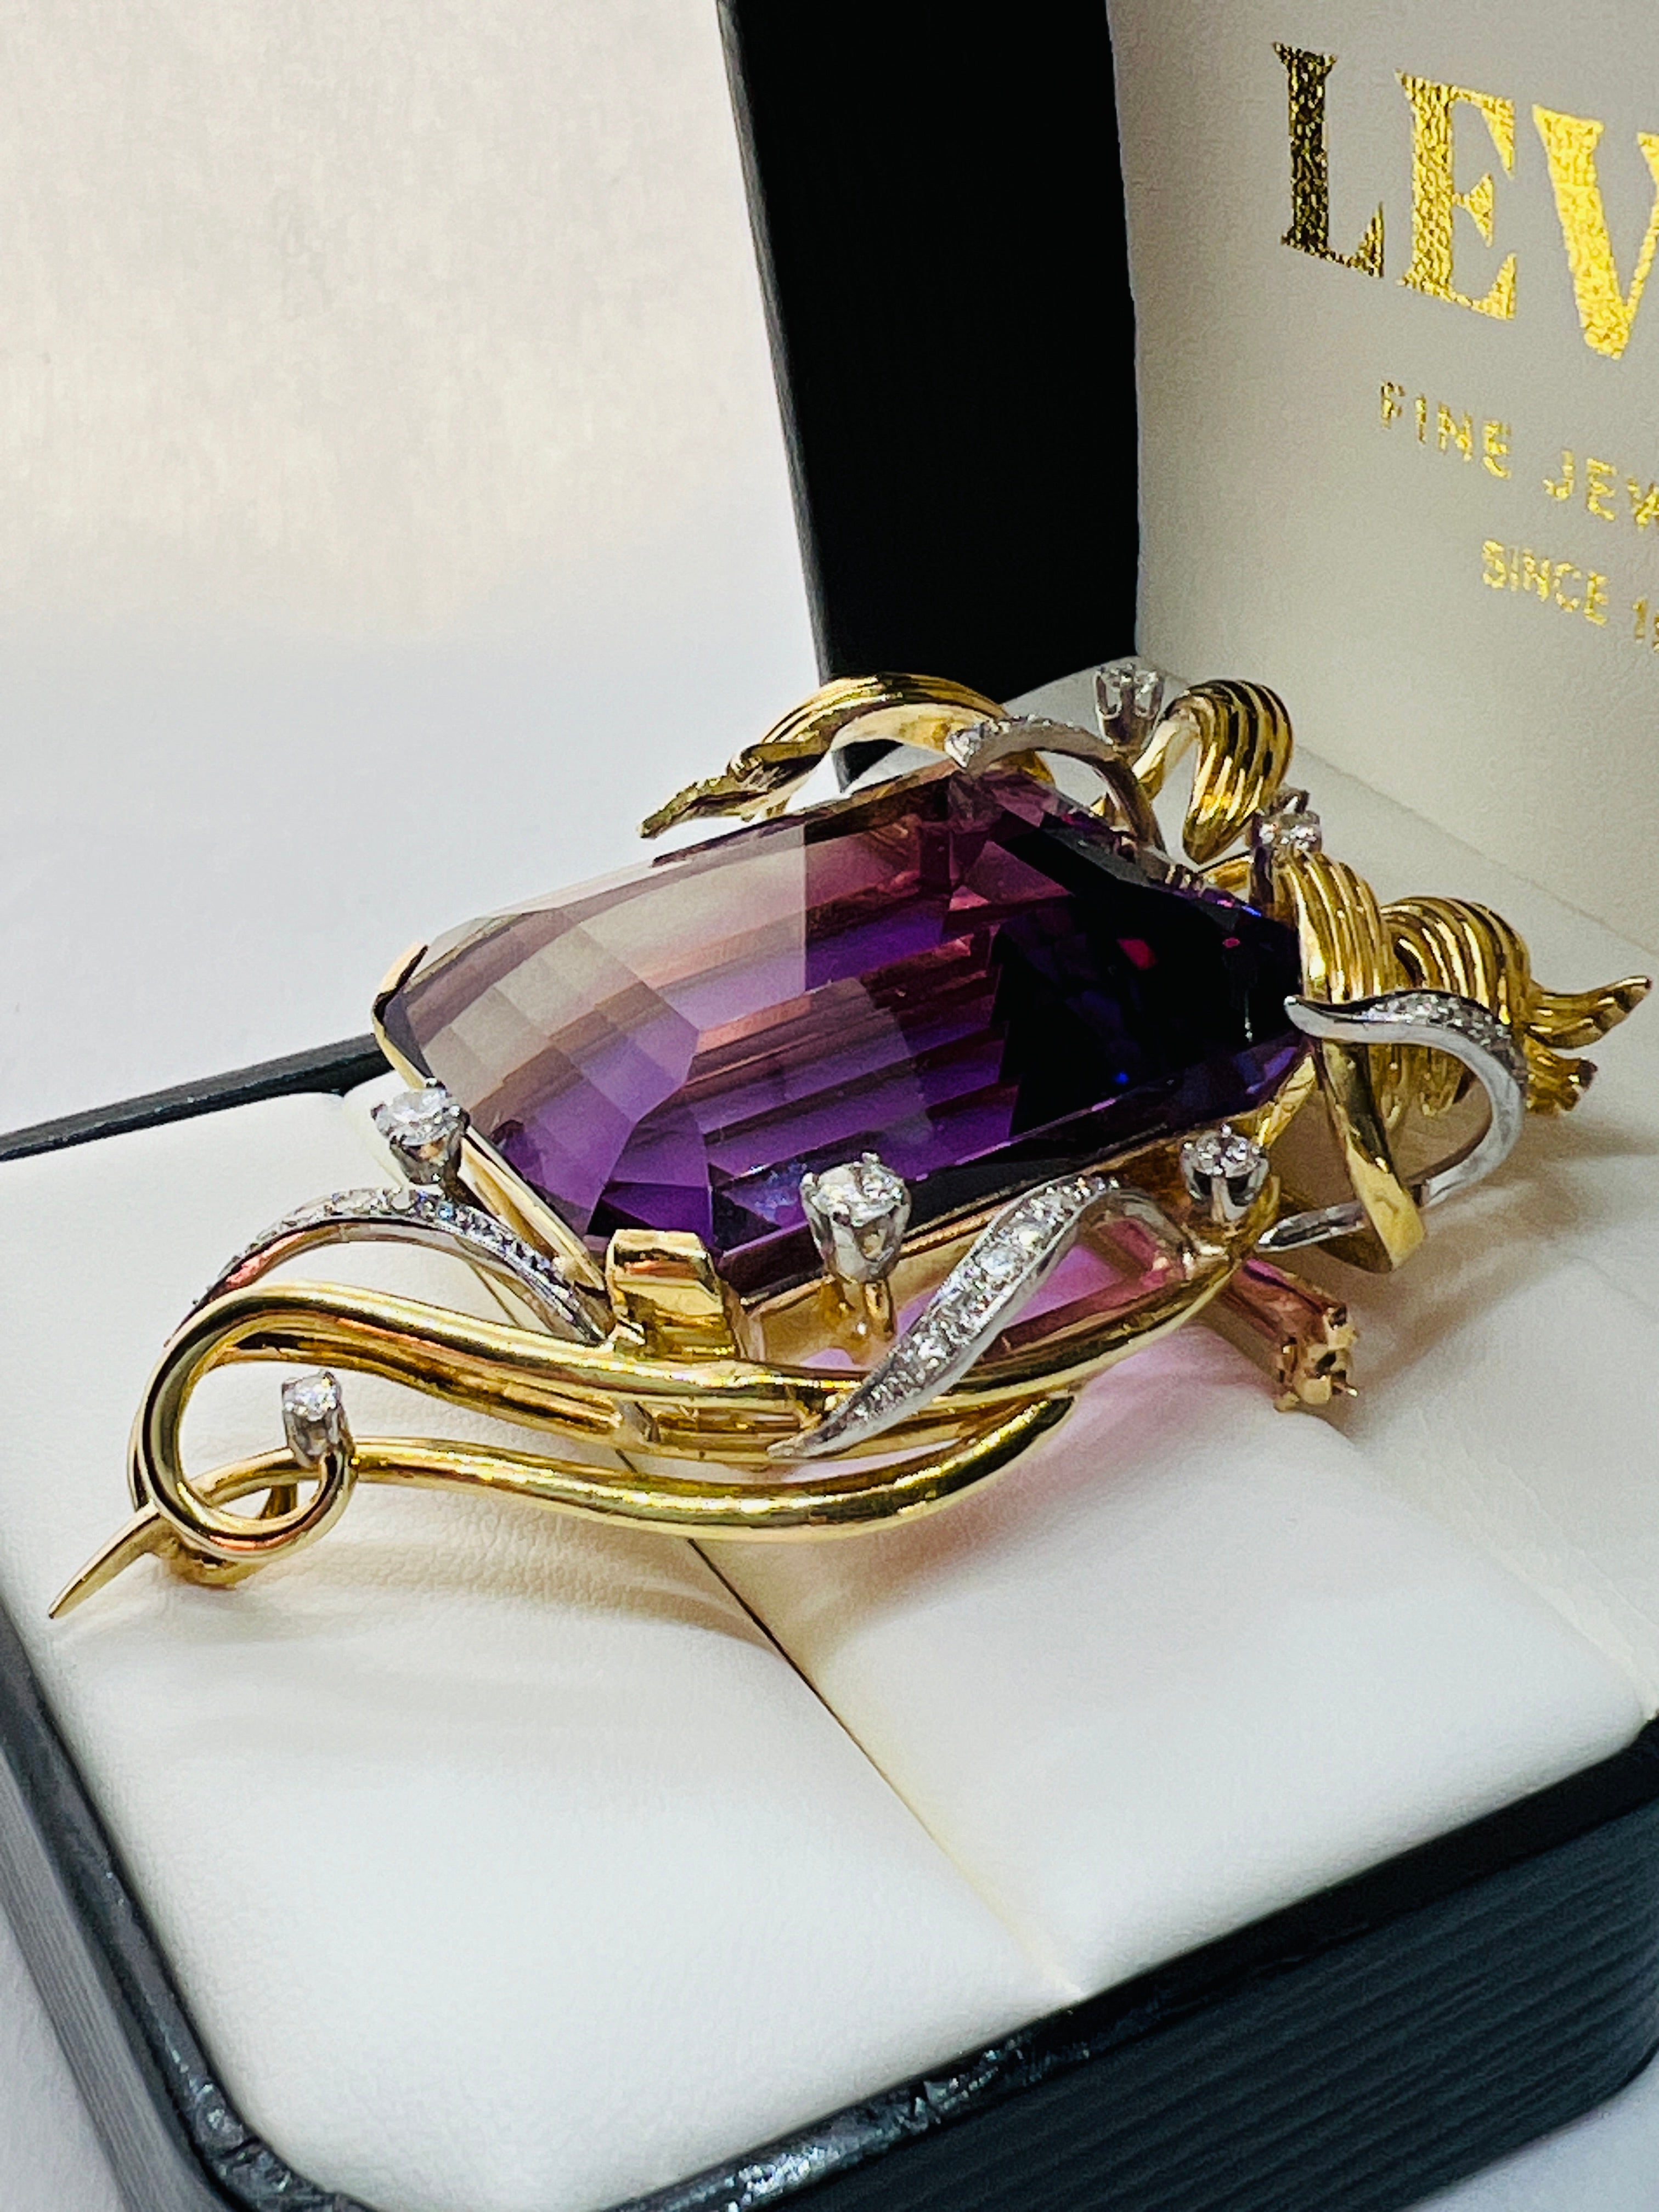 Absolutely StunningBrooch! This is a handmade Vintage piece that features a beautiful 130 carat amethyst at the center that measures 1 inch by 1.25 inch.  The amethyst is surrounded by ribbons of 18K yellow Gold as well as ribbons of diamonds. There